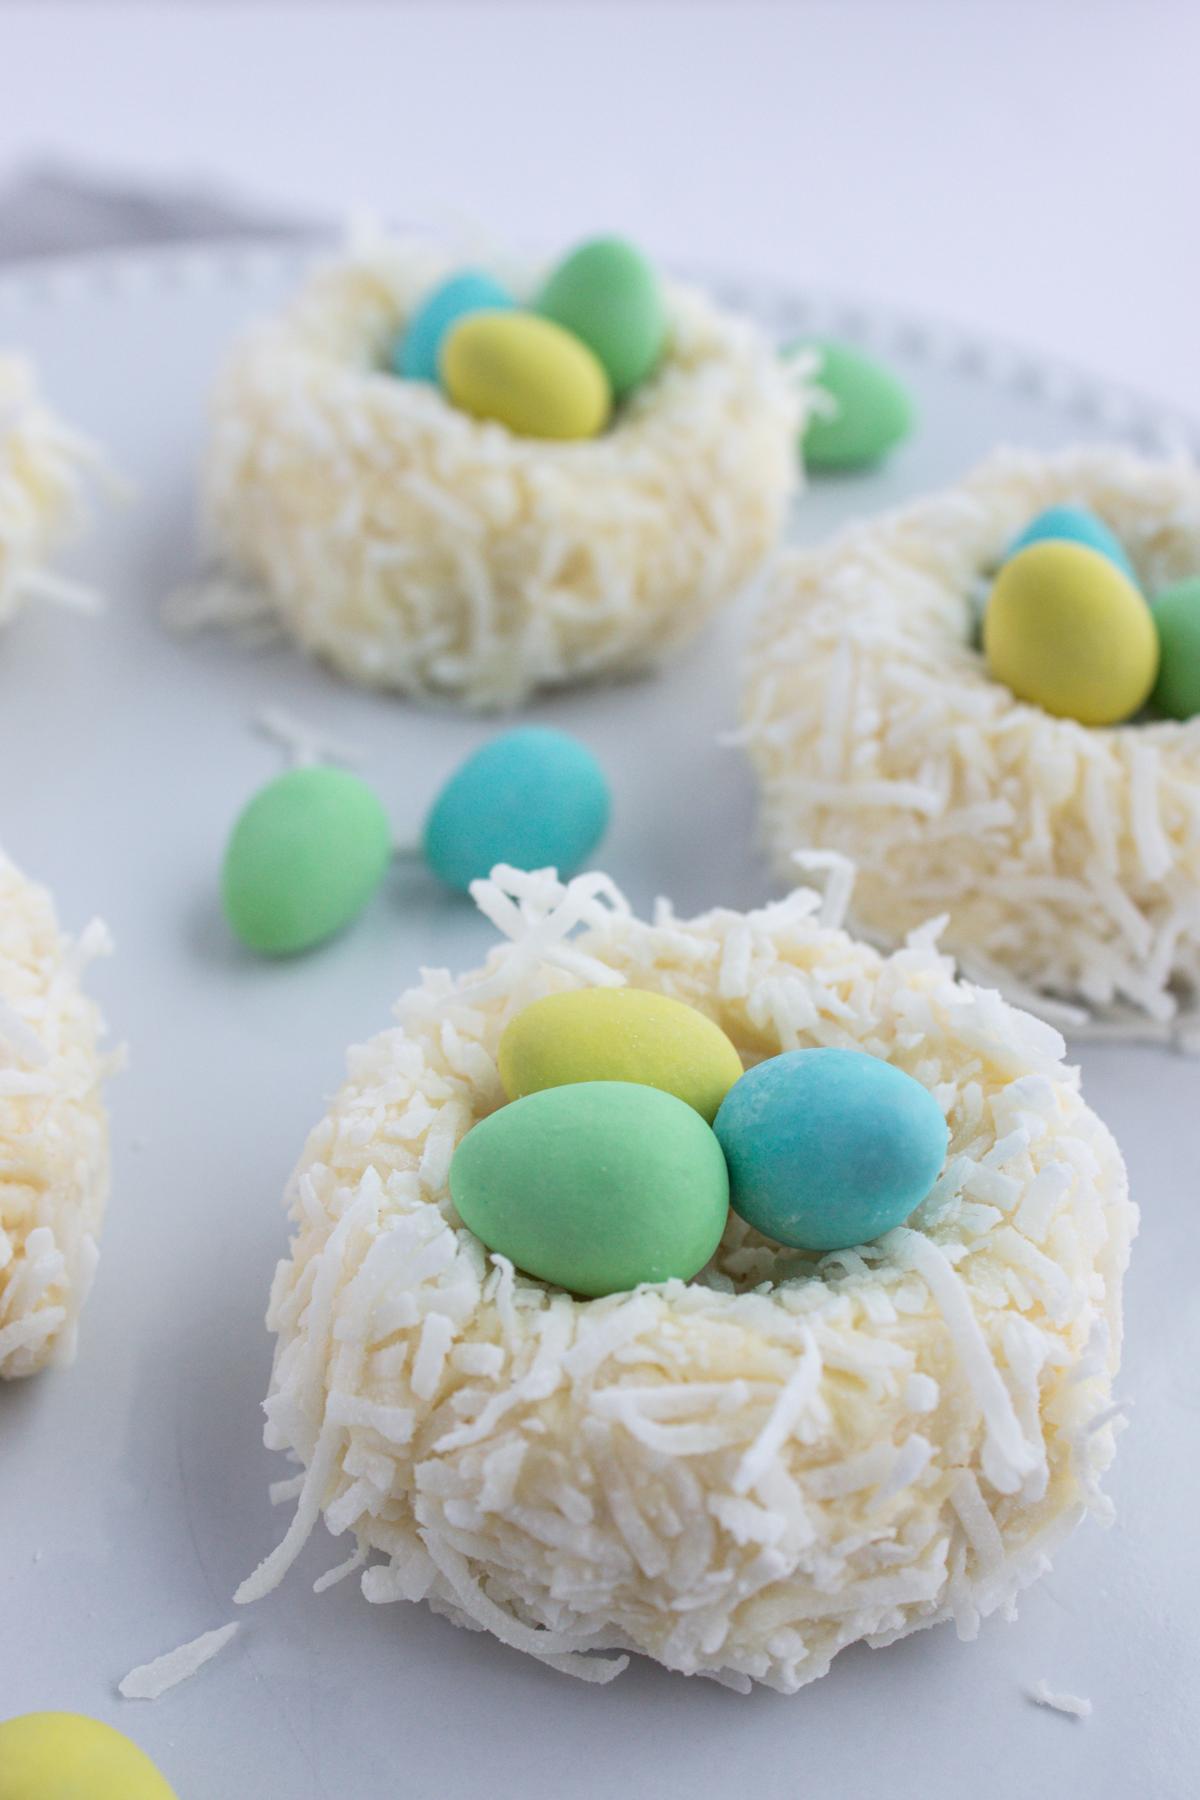 Mini cheeseball nests with "eggs" in them.